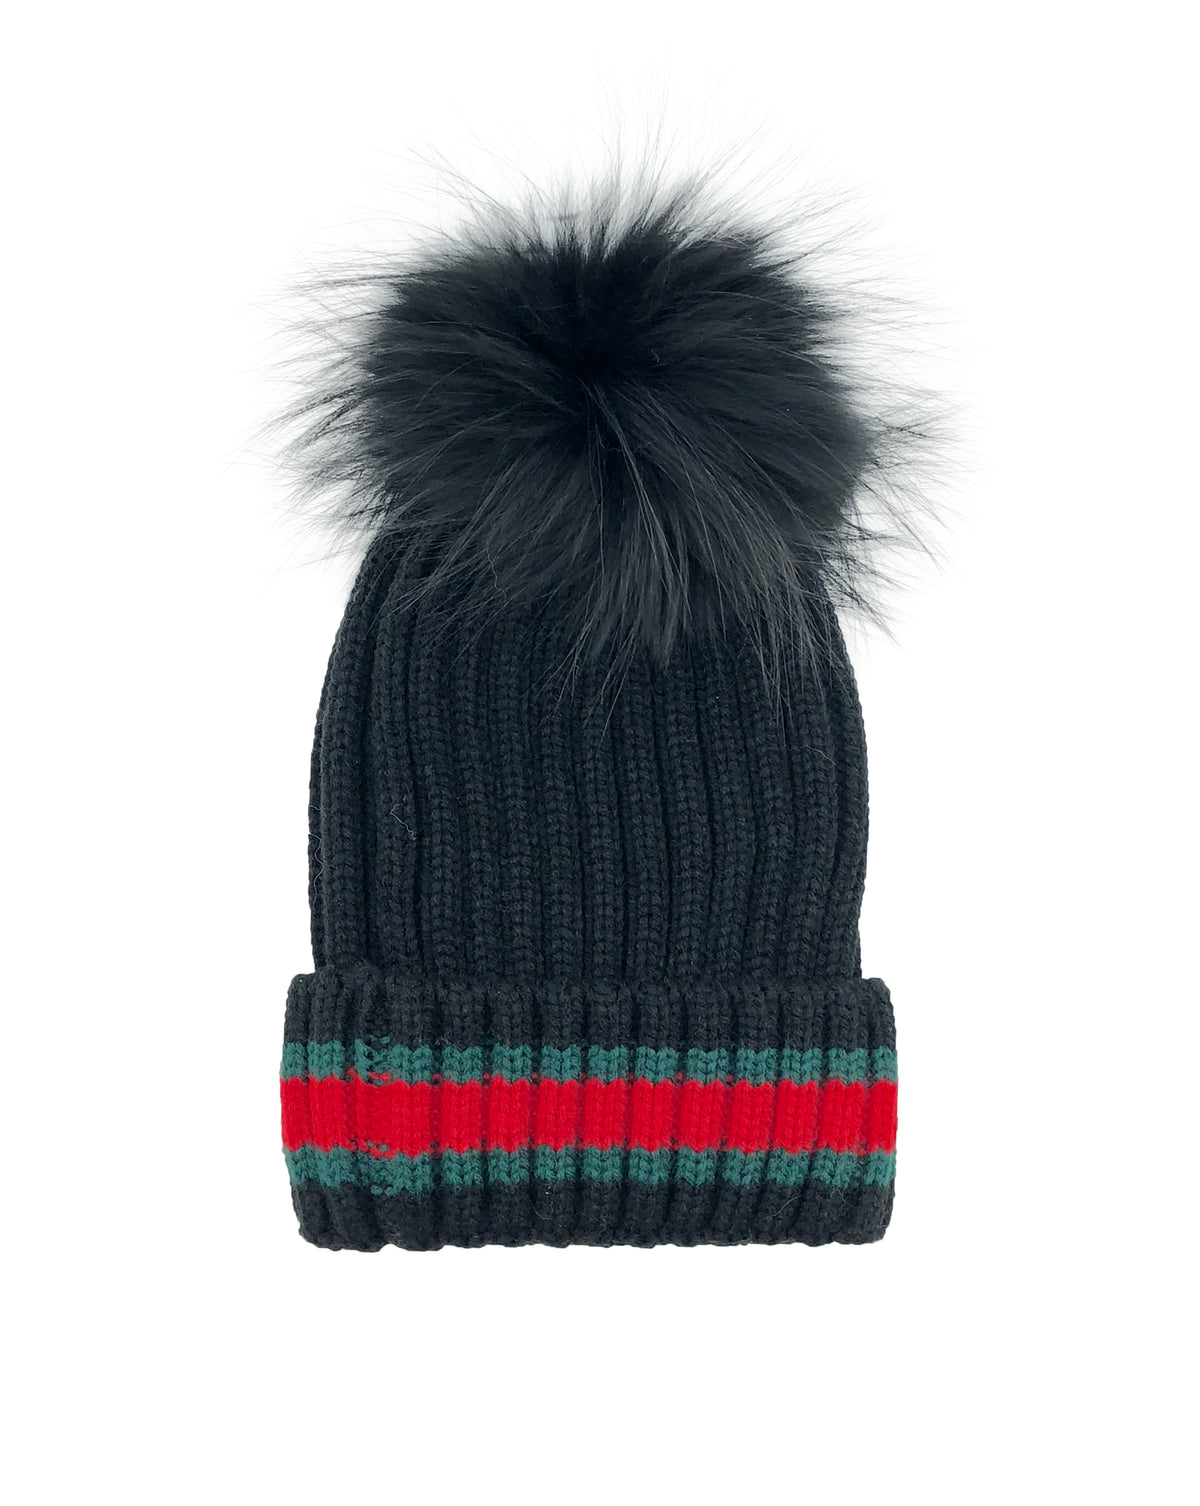 Striped Knitted Beanie with Removable Fur Pom - paulamariecollection